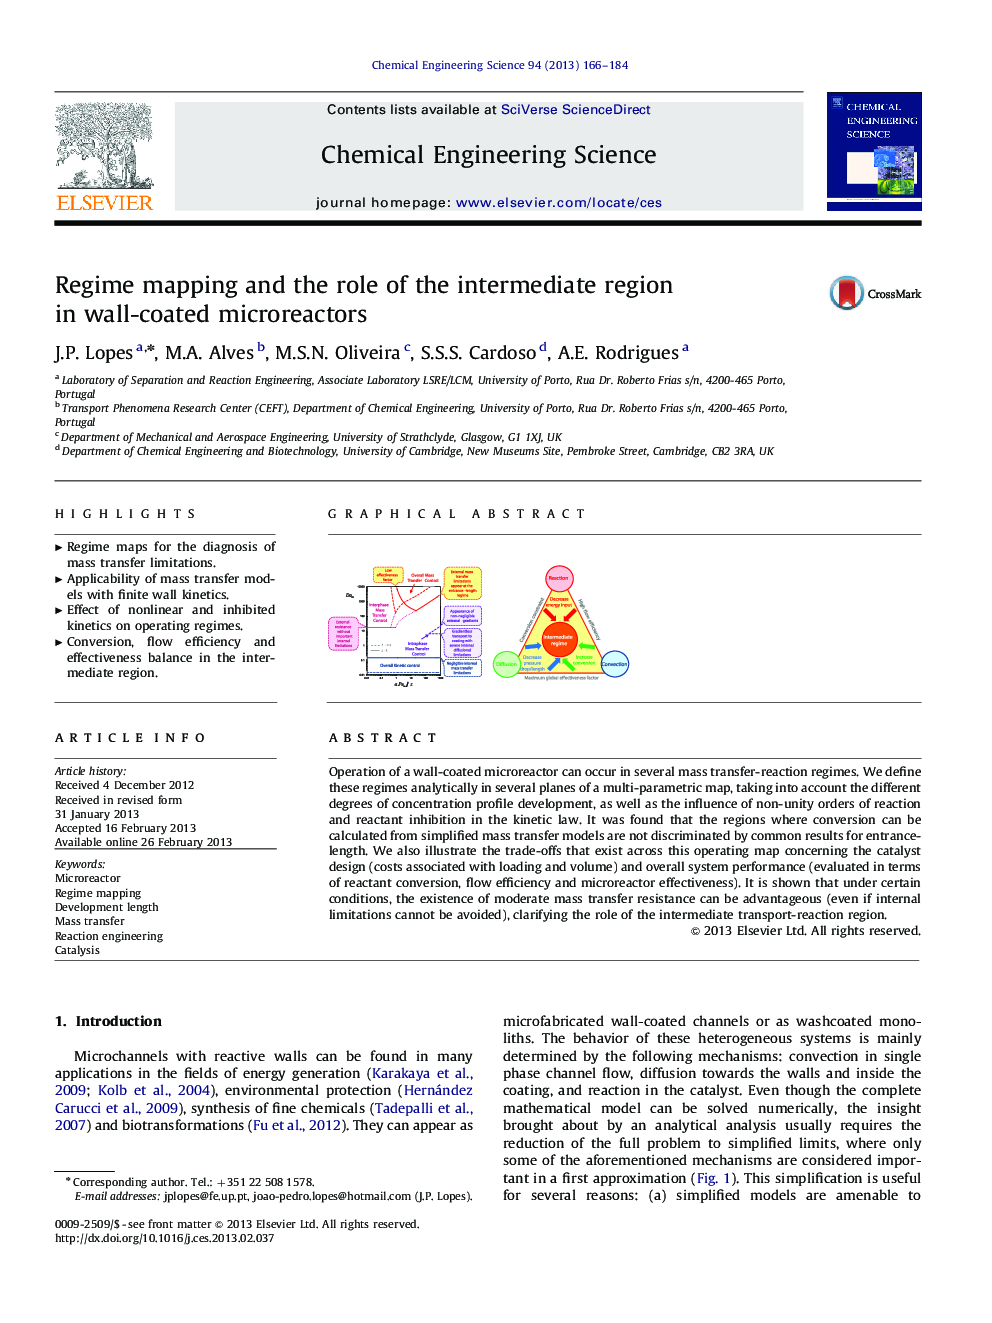 Regime mapping and the role of the intermediate region in wall-coated microreactors